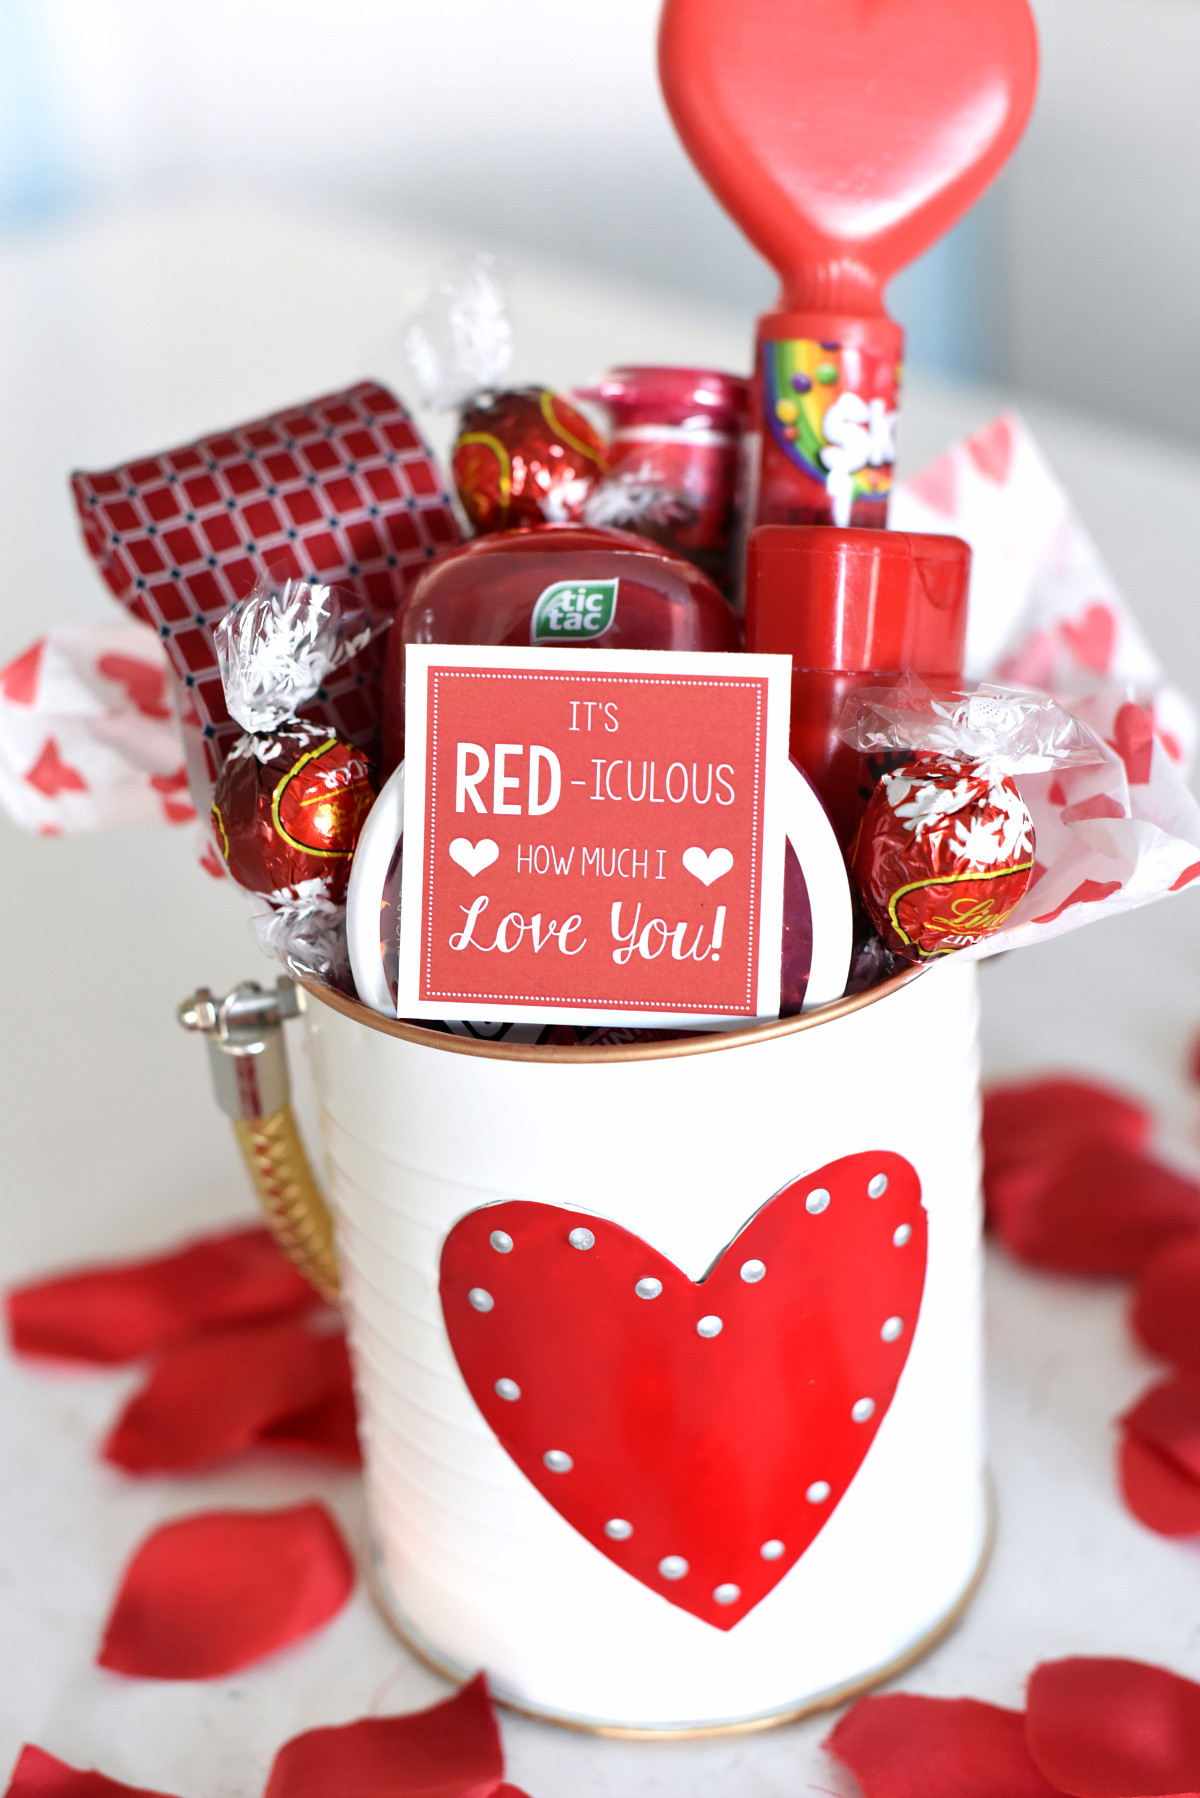 Valentines Day Home Made Gifts
 25 DIY Valentine s Day Gift Ideas Teens Will Love